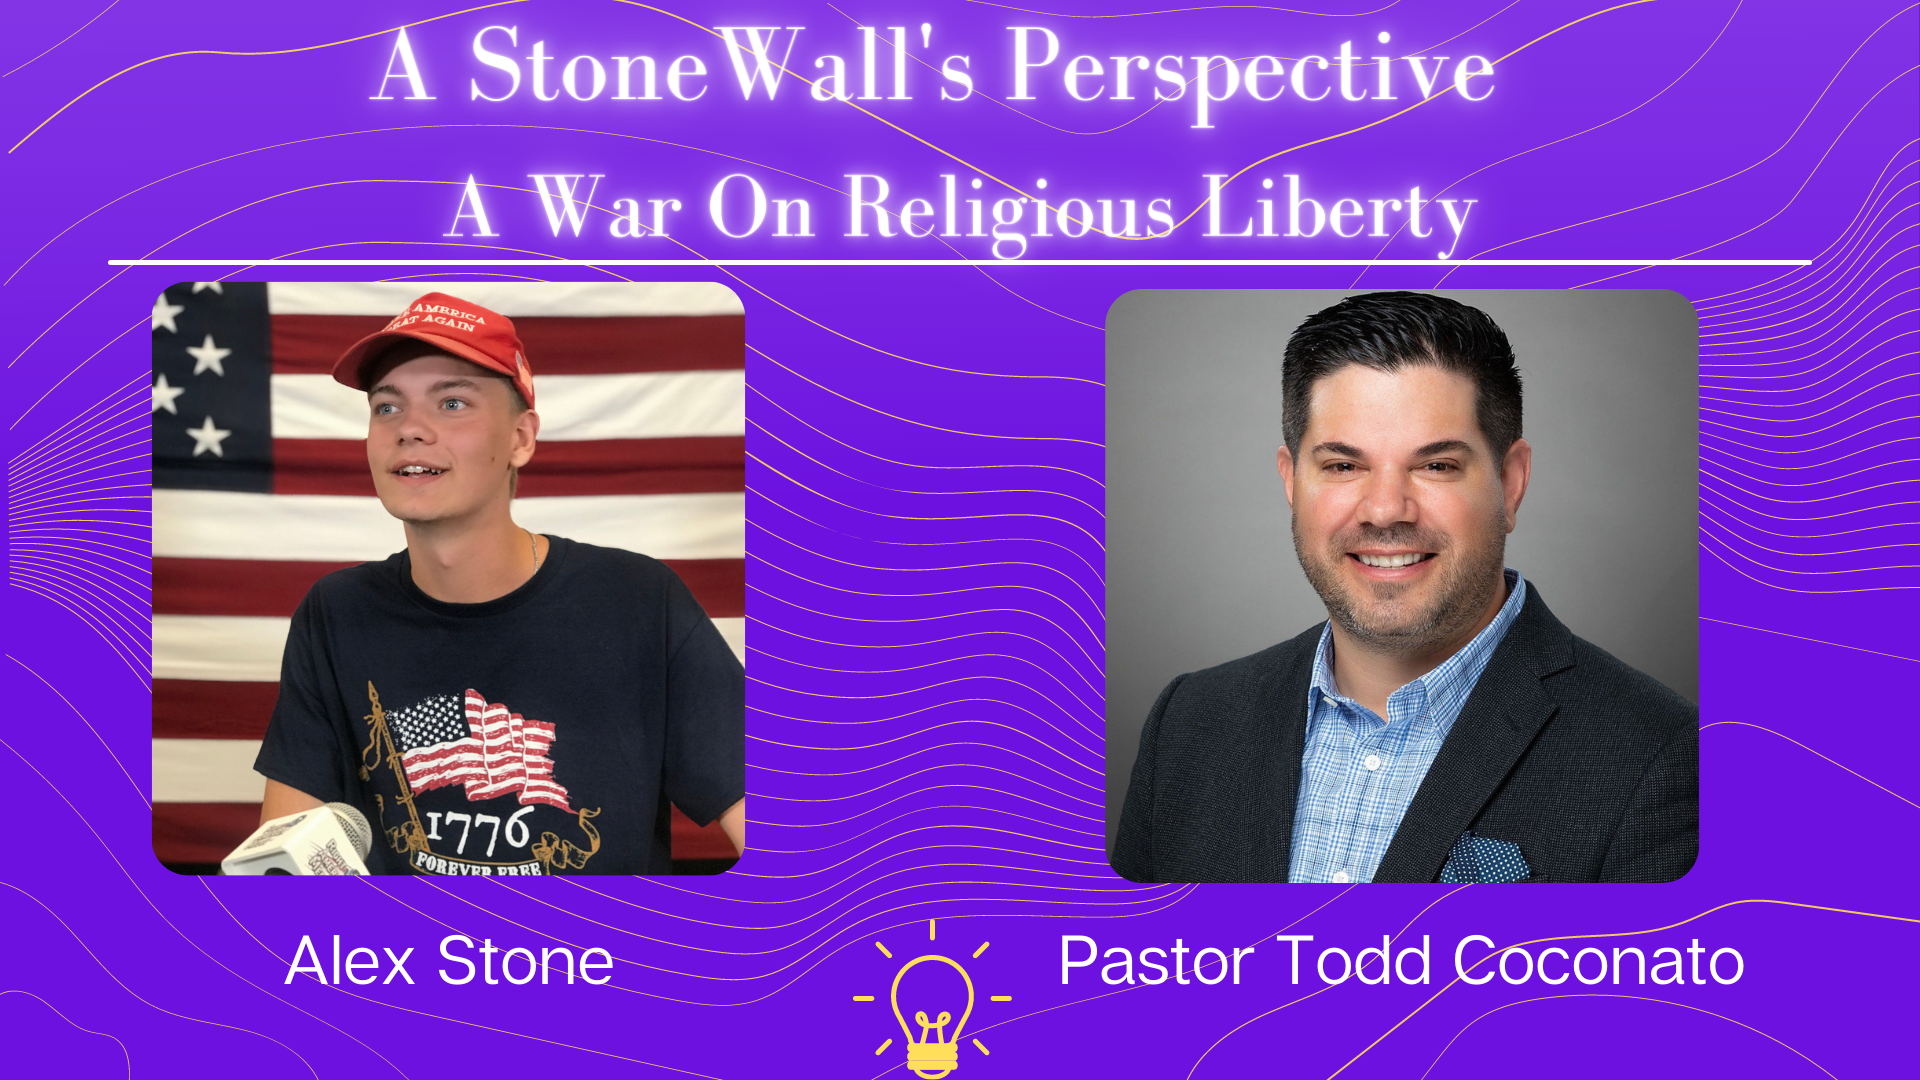 A War On Religious Liberty